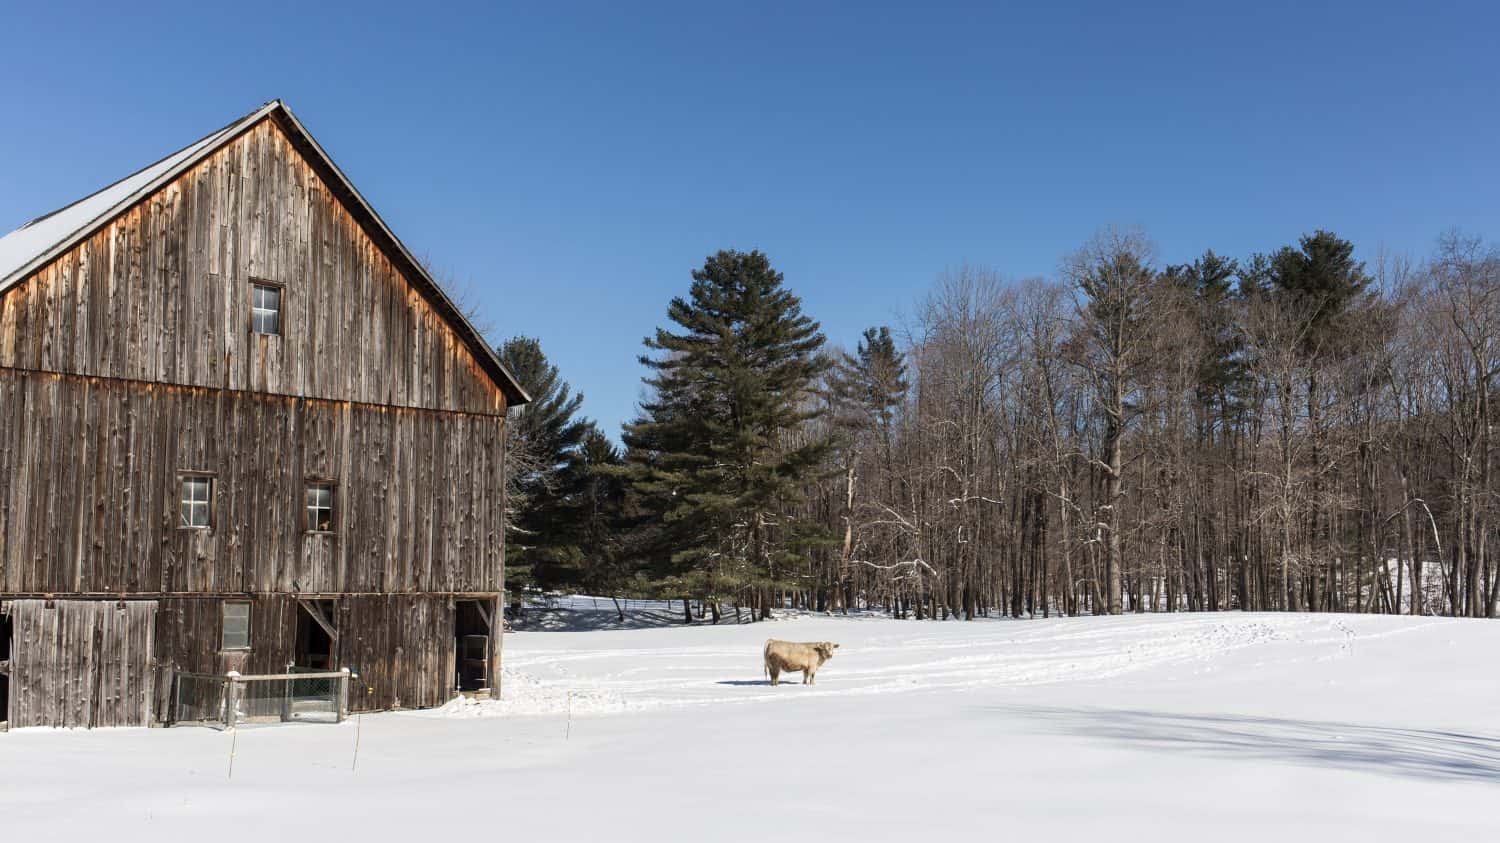 A single cow in a snowy pasture next to an old wooden, New England barn.